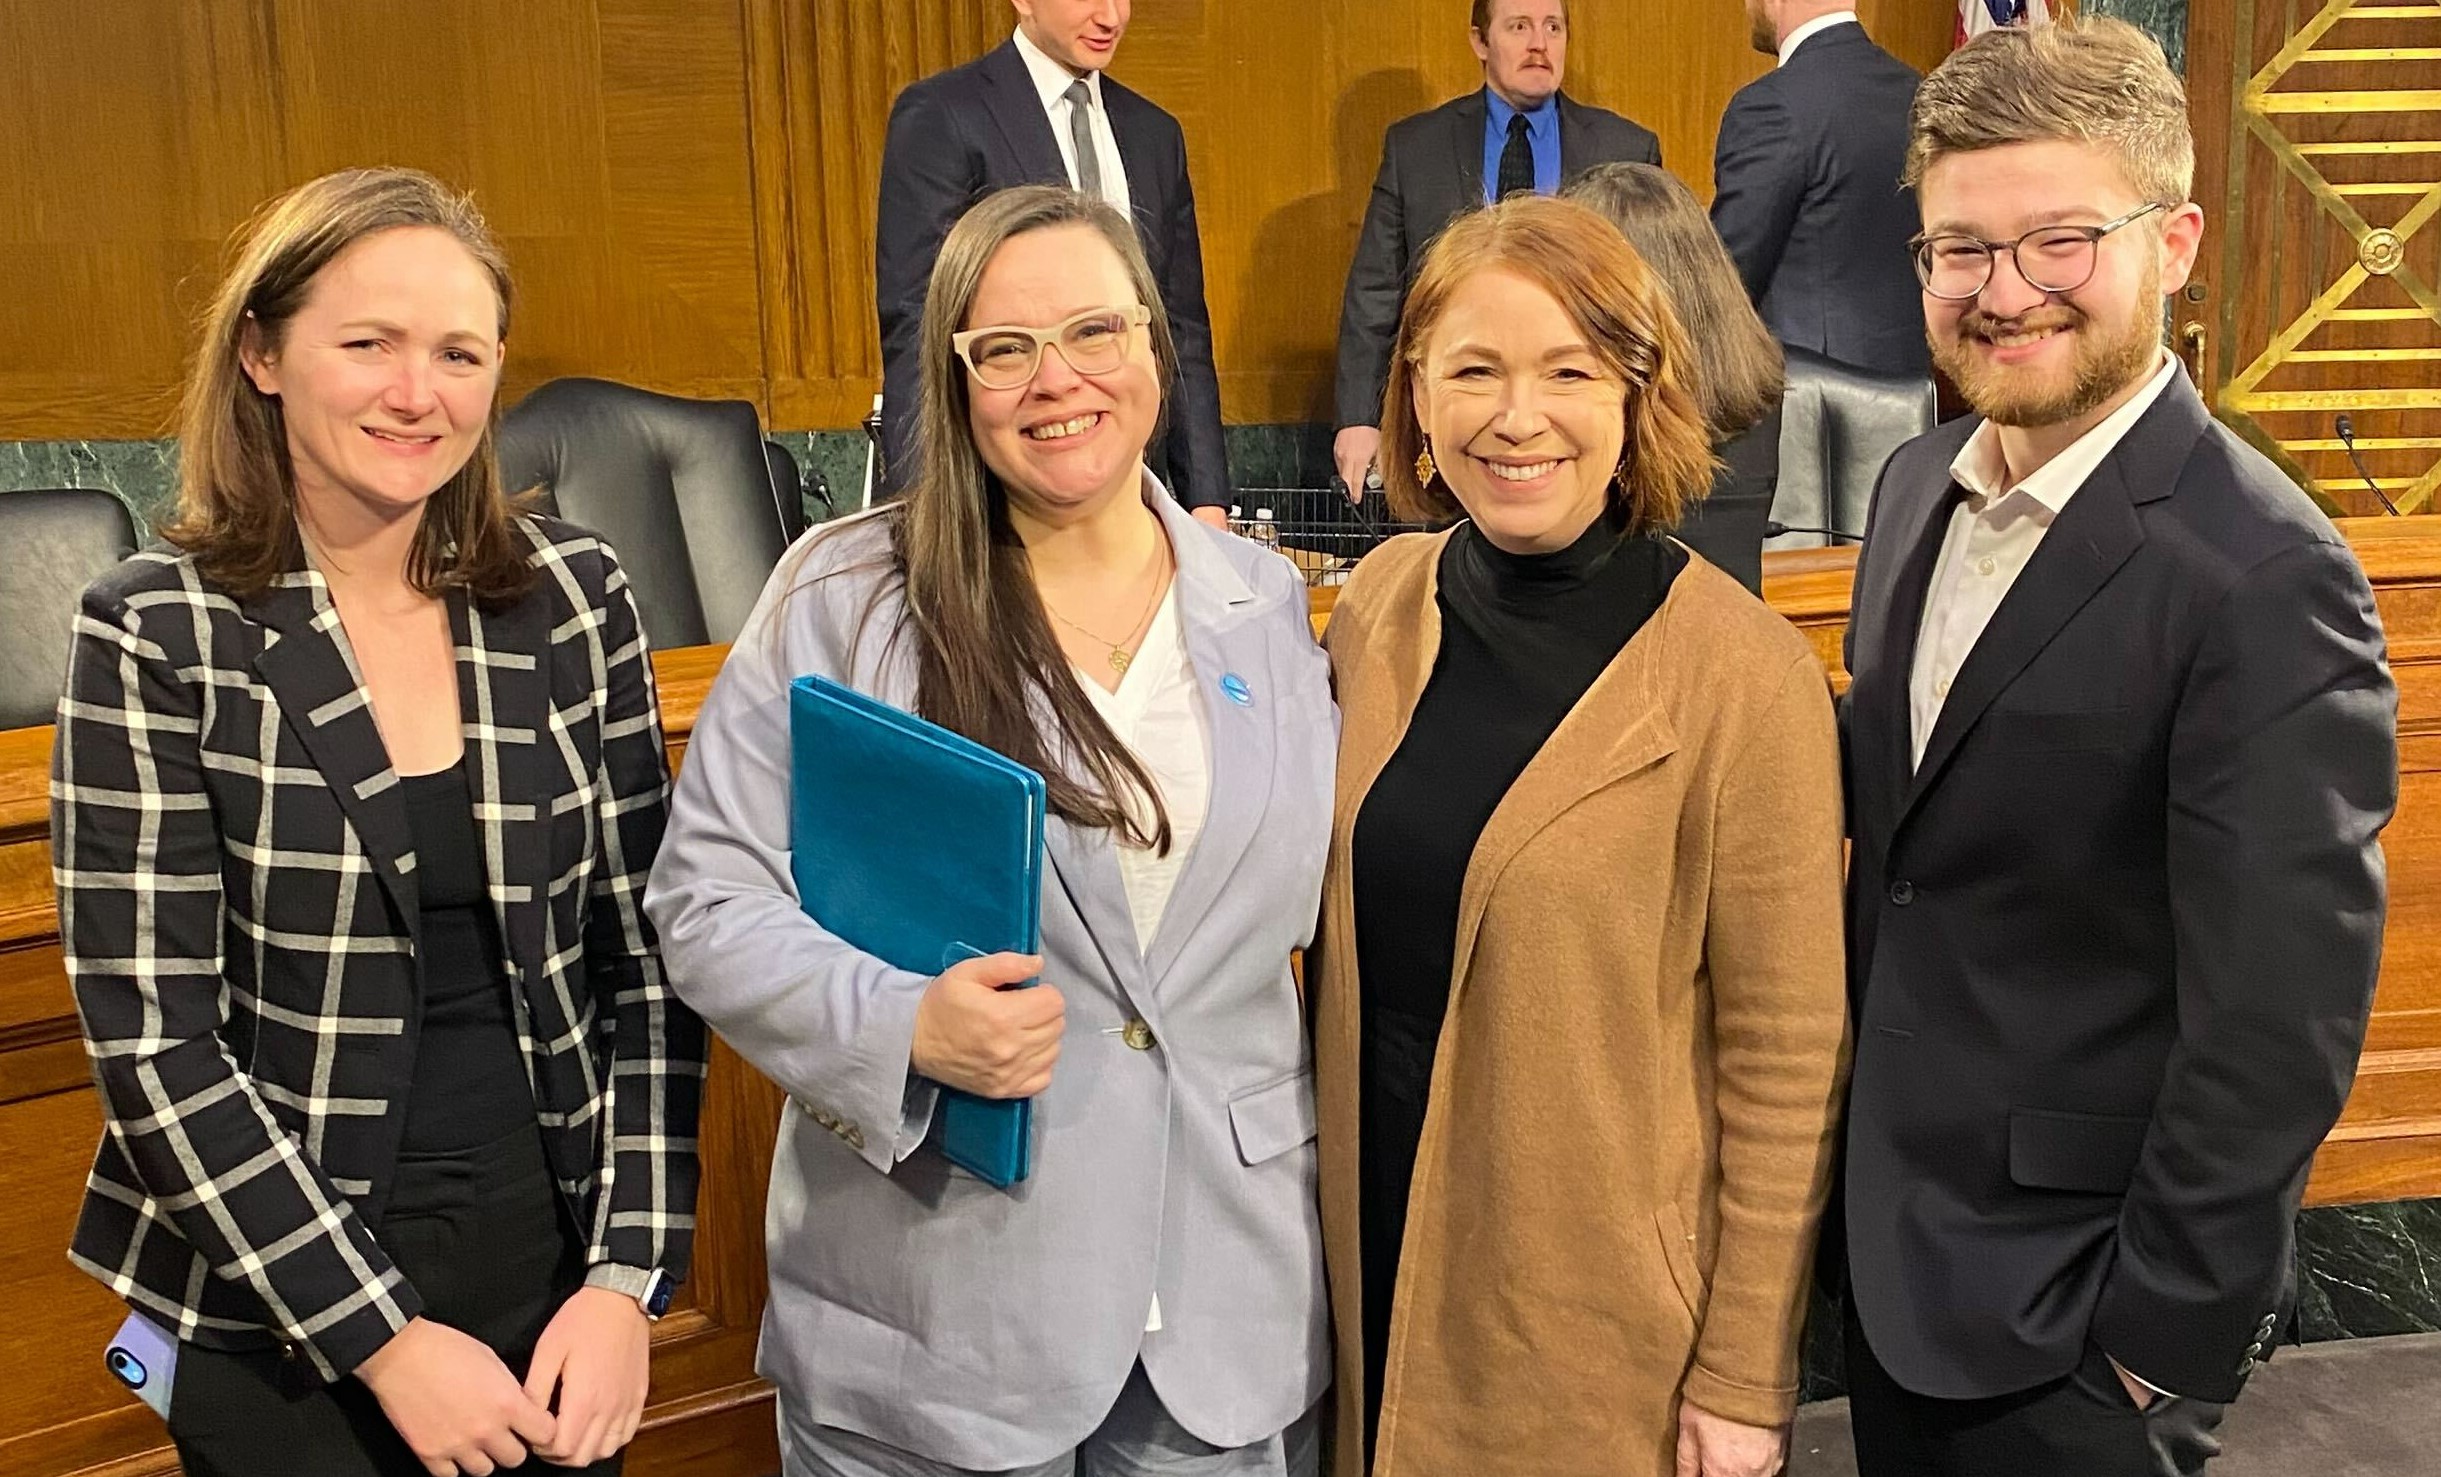 ANCOR staff pictured with Pam Lowy at the Senate Aging Committee hearing.